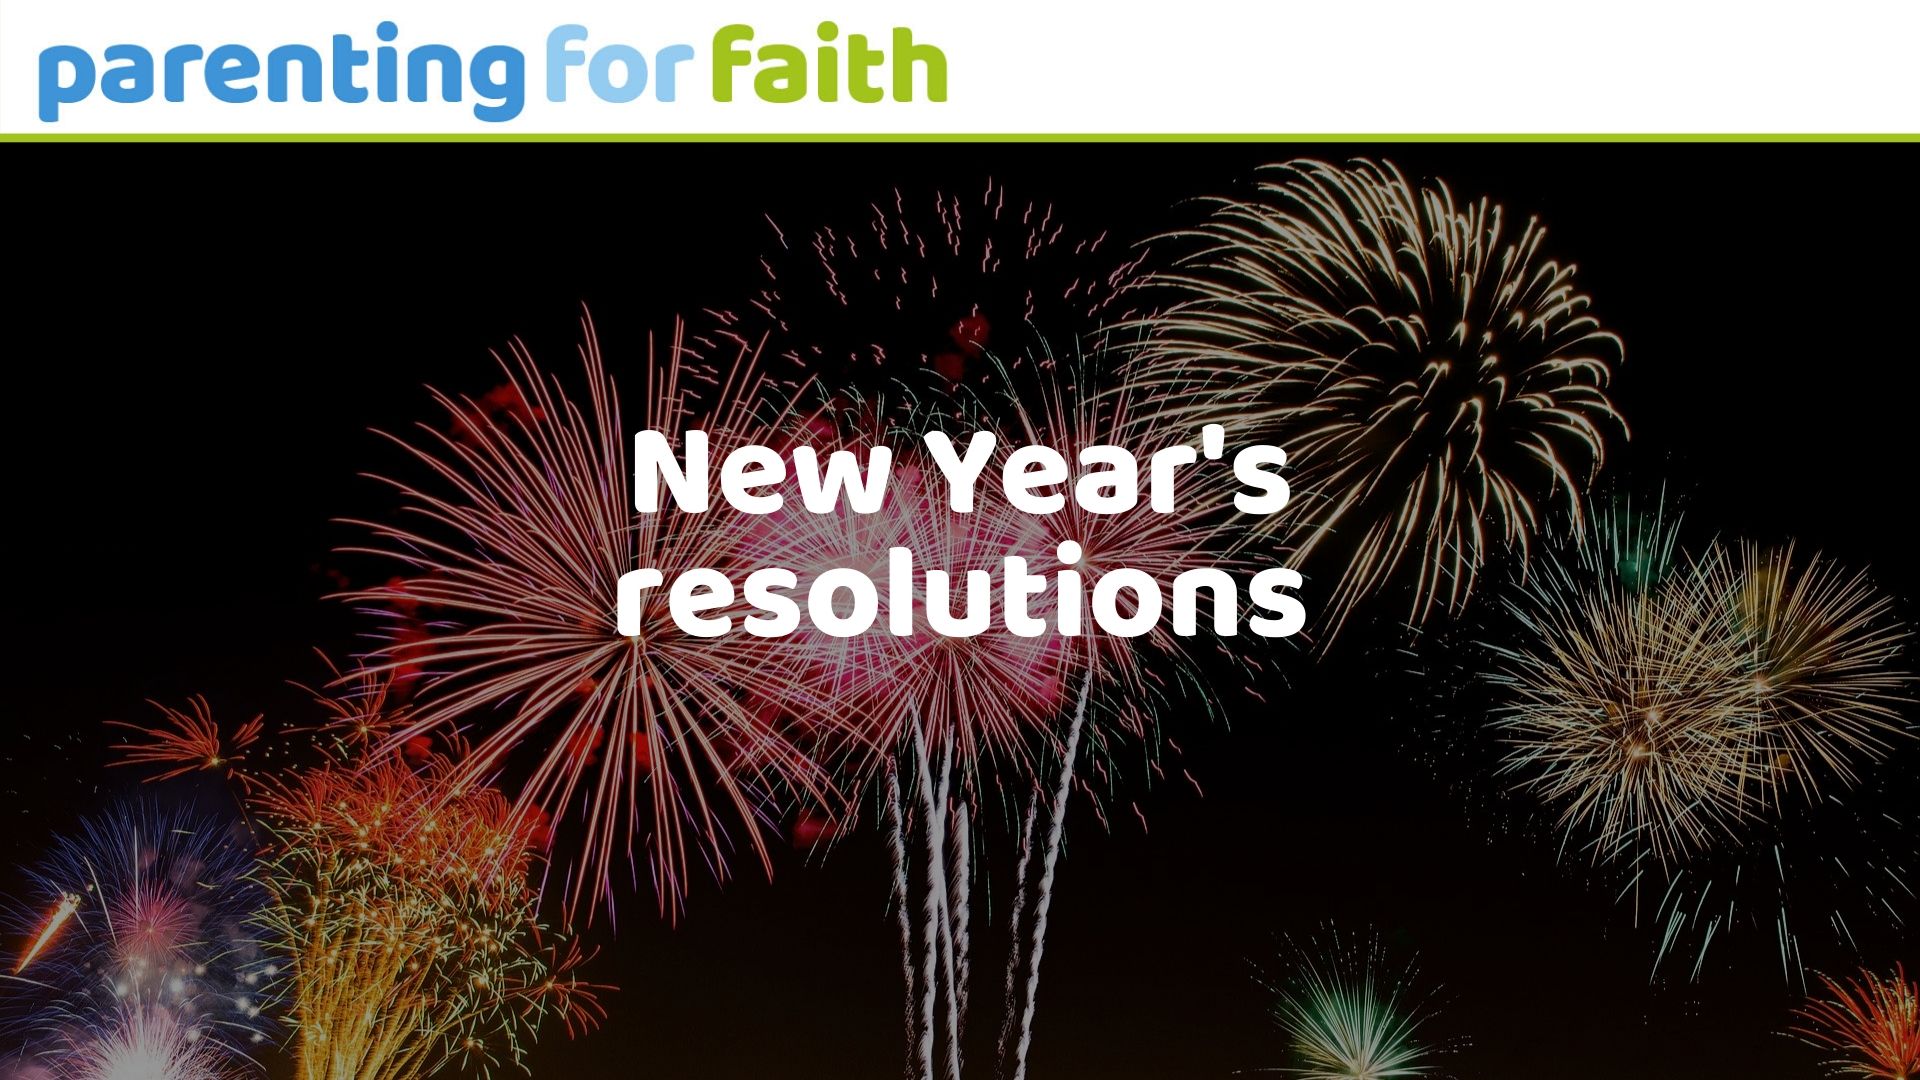 new years resolutions OG image for PFF website 1920 x 1080px